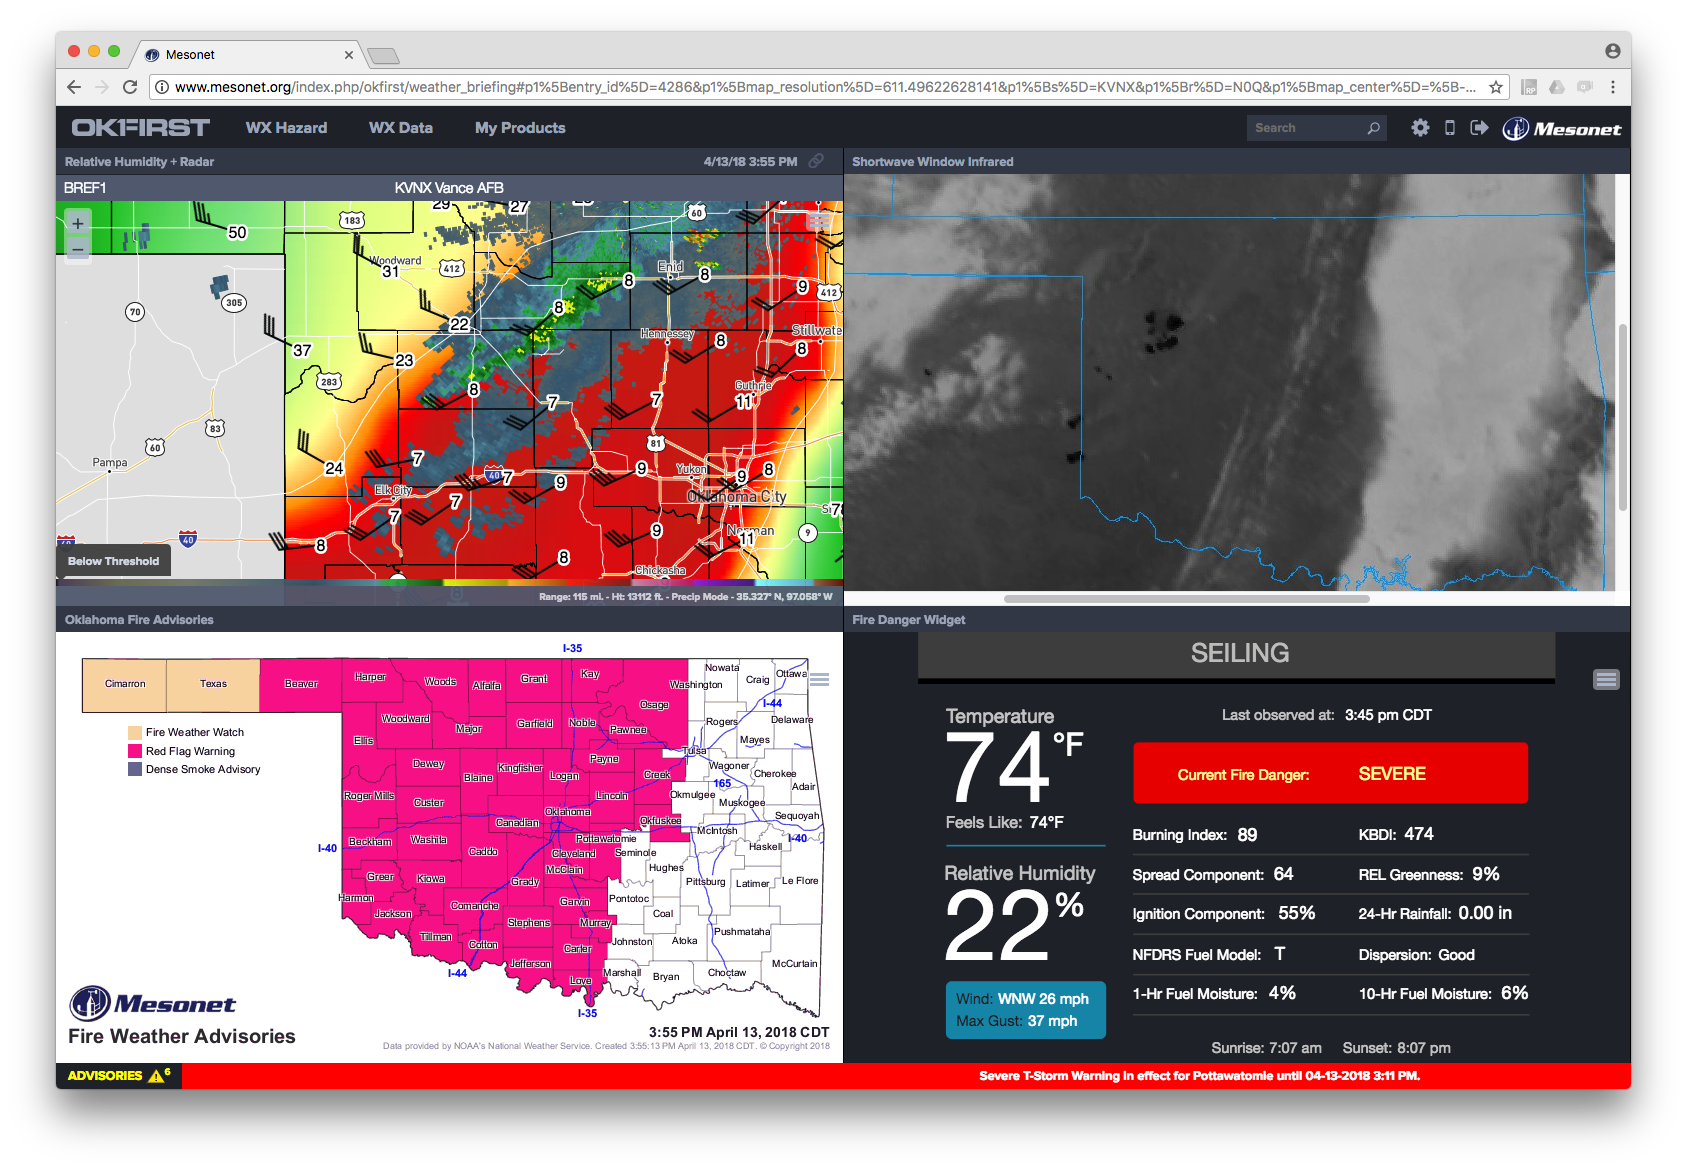 OK-First Weather Briefing page displaying critical maps during a fire weather day including relative humidity with wind, infrared satellite, fire weather advisories, and the fire danger widget.